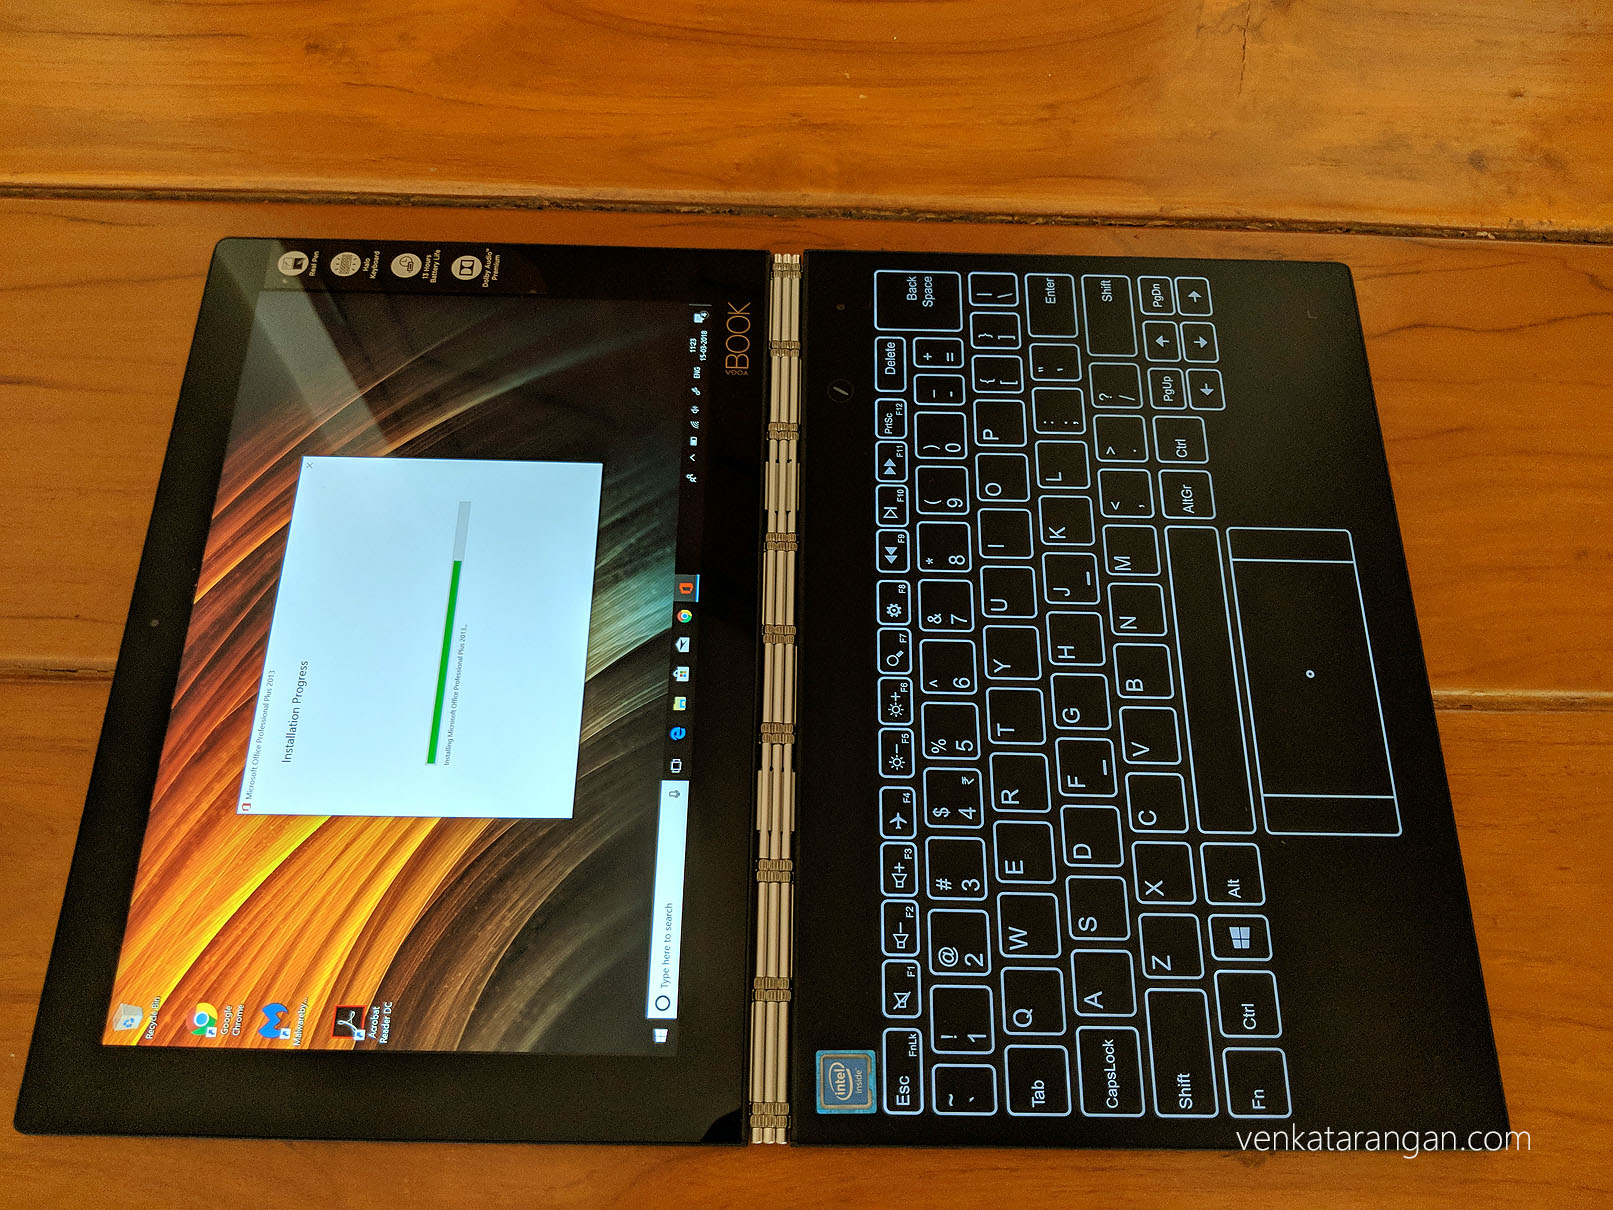 Notice the wristwatch strap hinges and the glass keyboard - Lenovo Yoga Book with Windows 